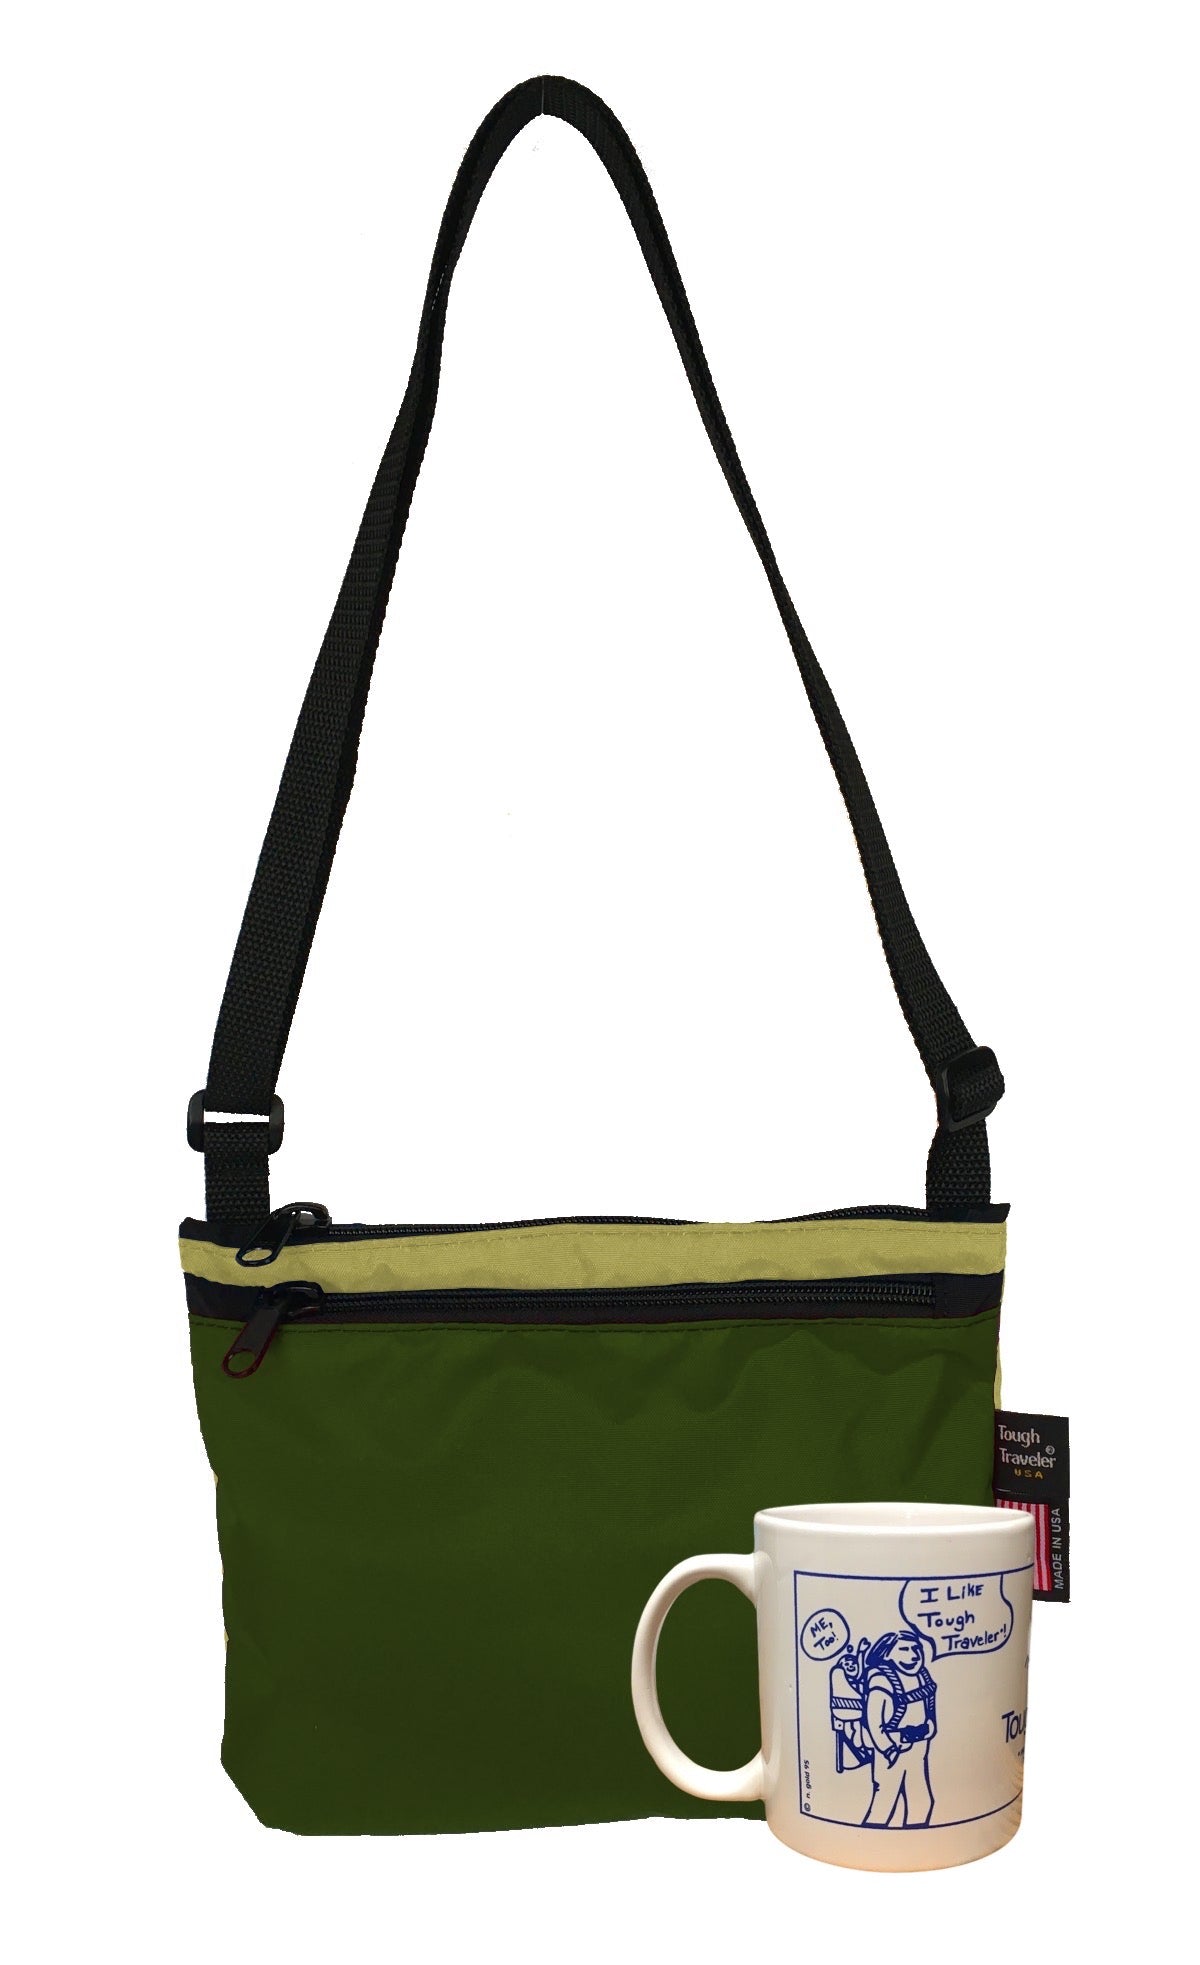 MINNOW Bag Shoulder Bags, by Tough Traveler. Made in USA since 1970